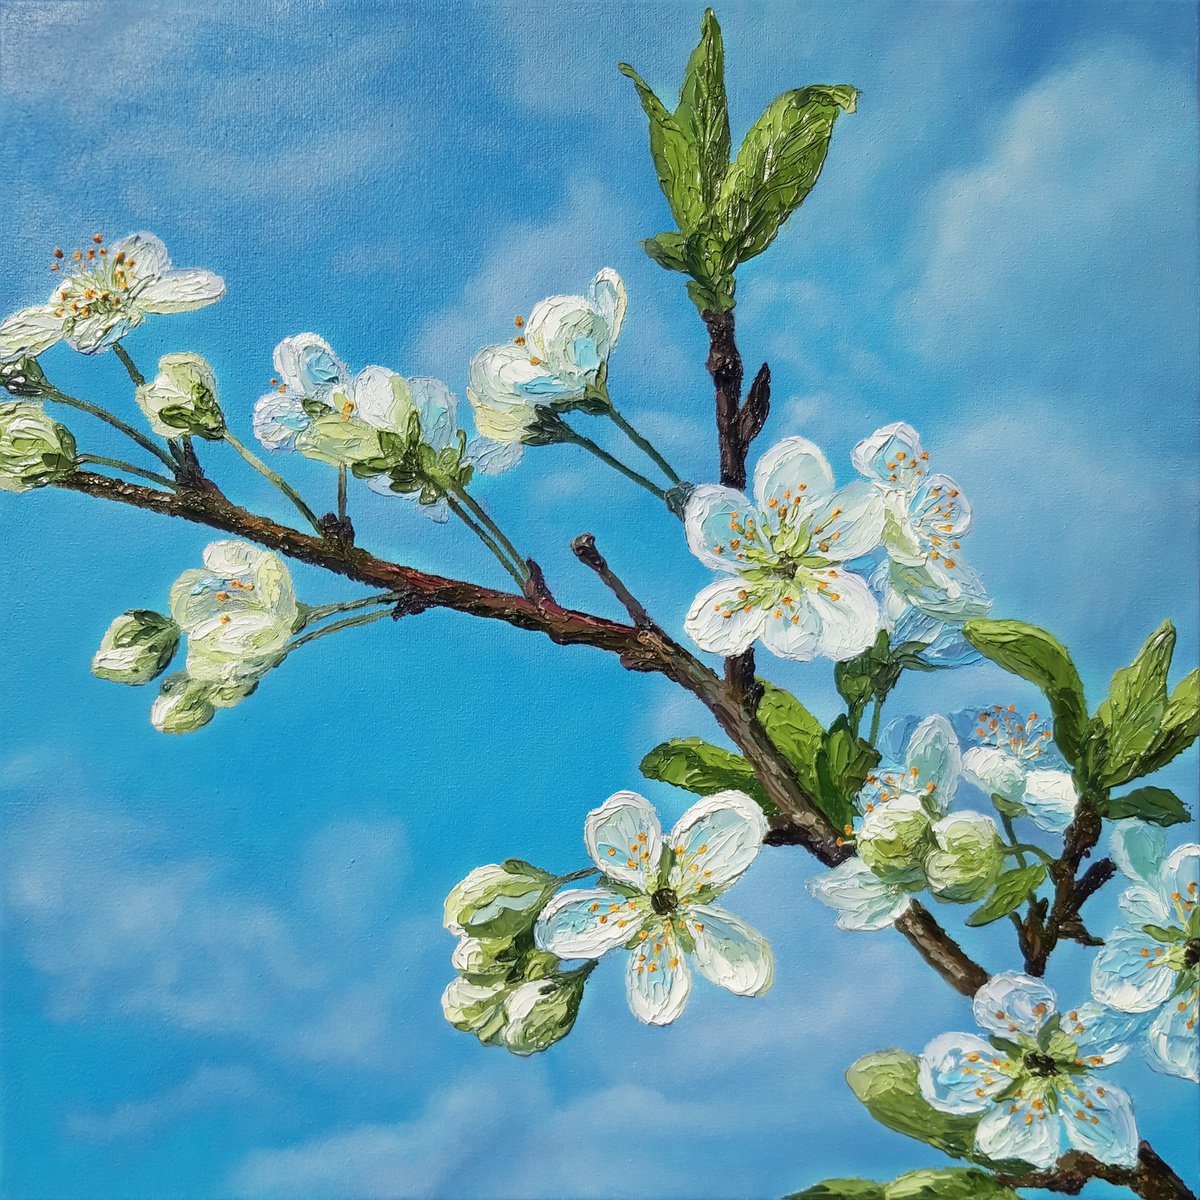 Spring morning, blossom painting by Anna Steshenko